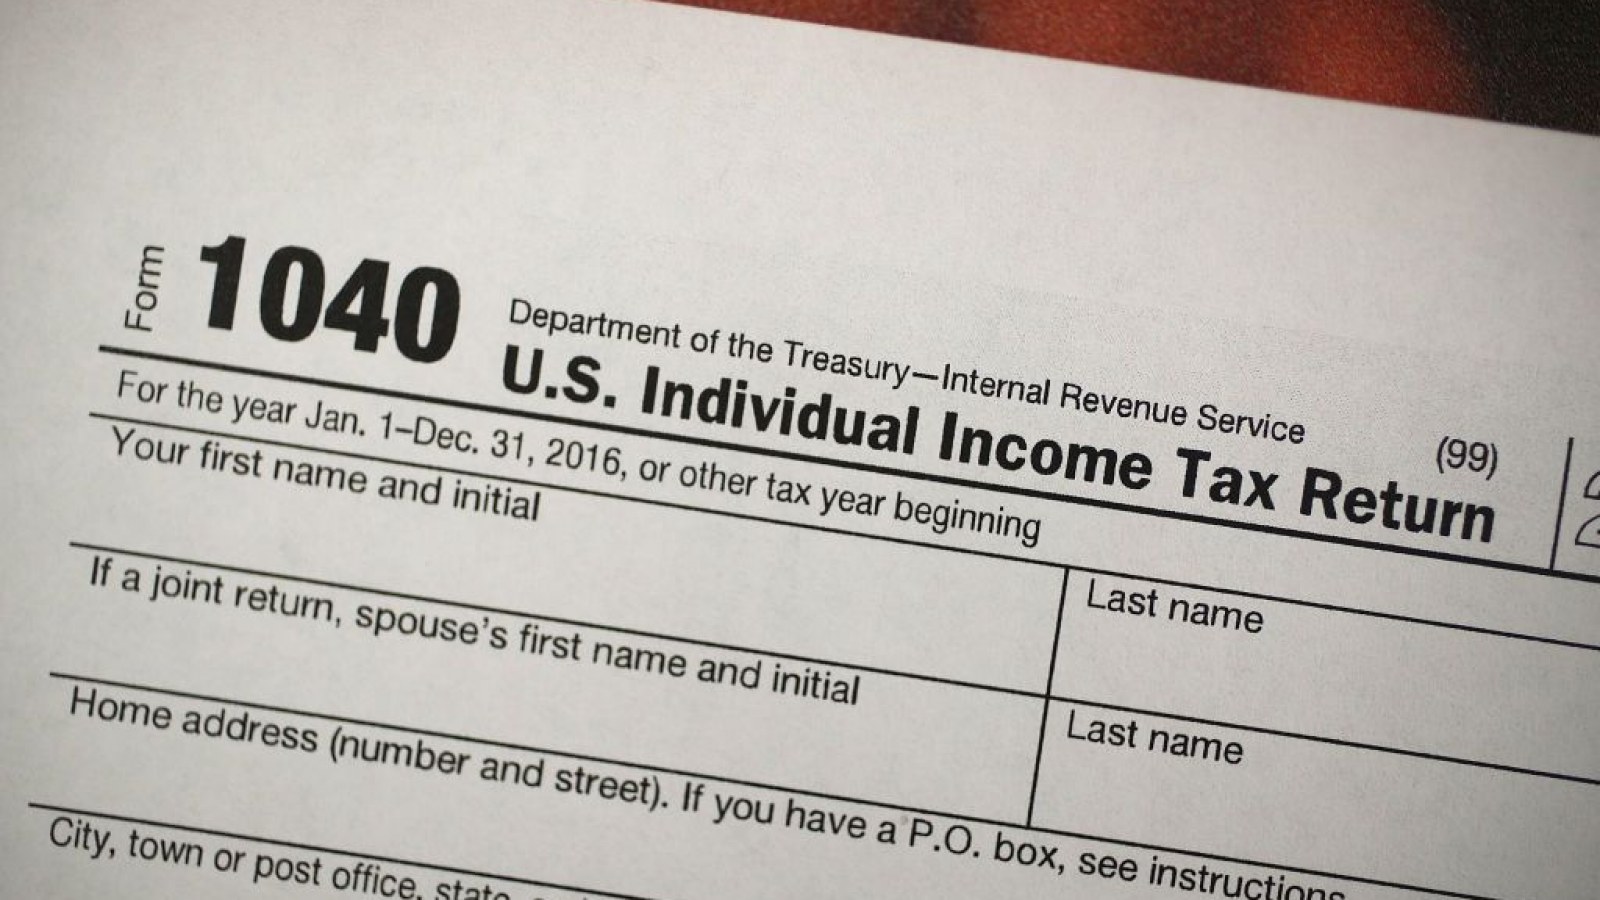 When Will The IRS Start Accepting Returns In 2018